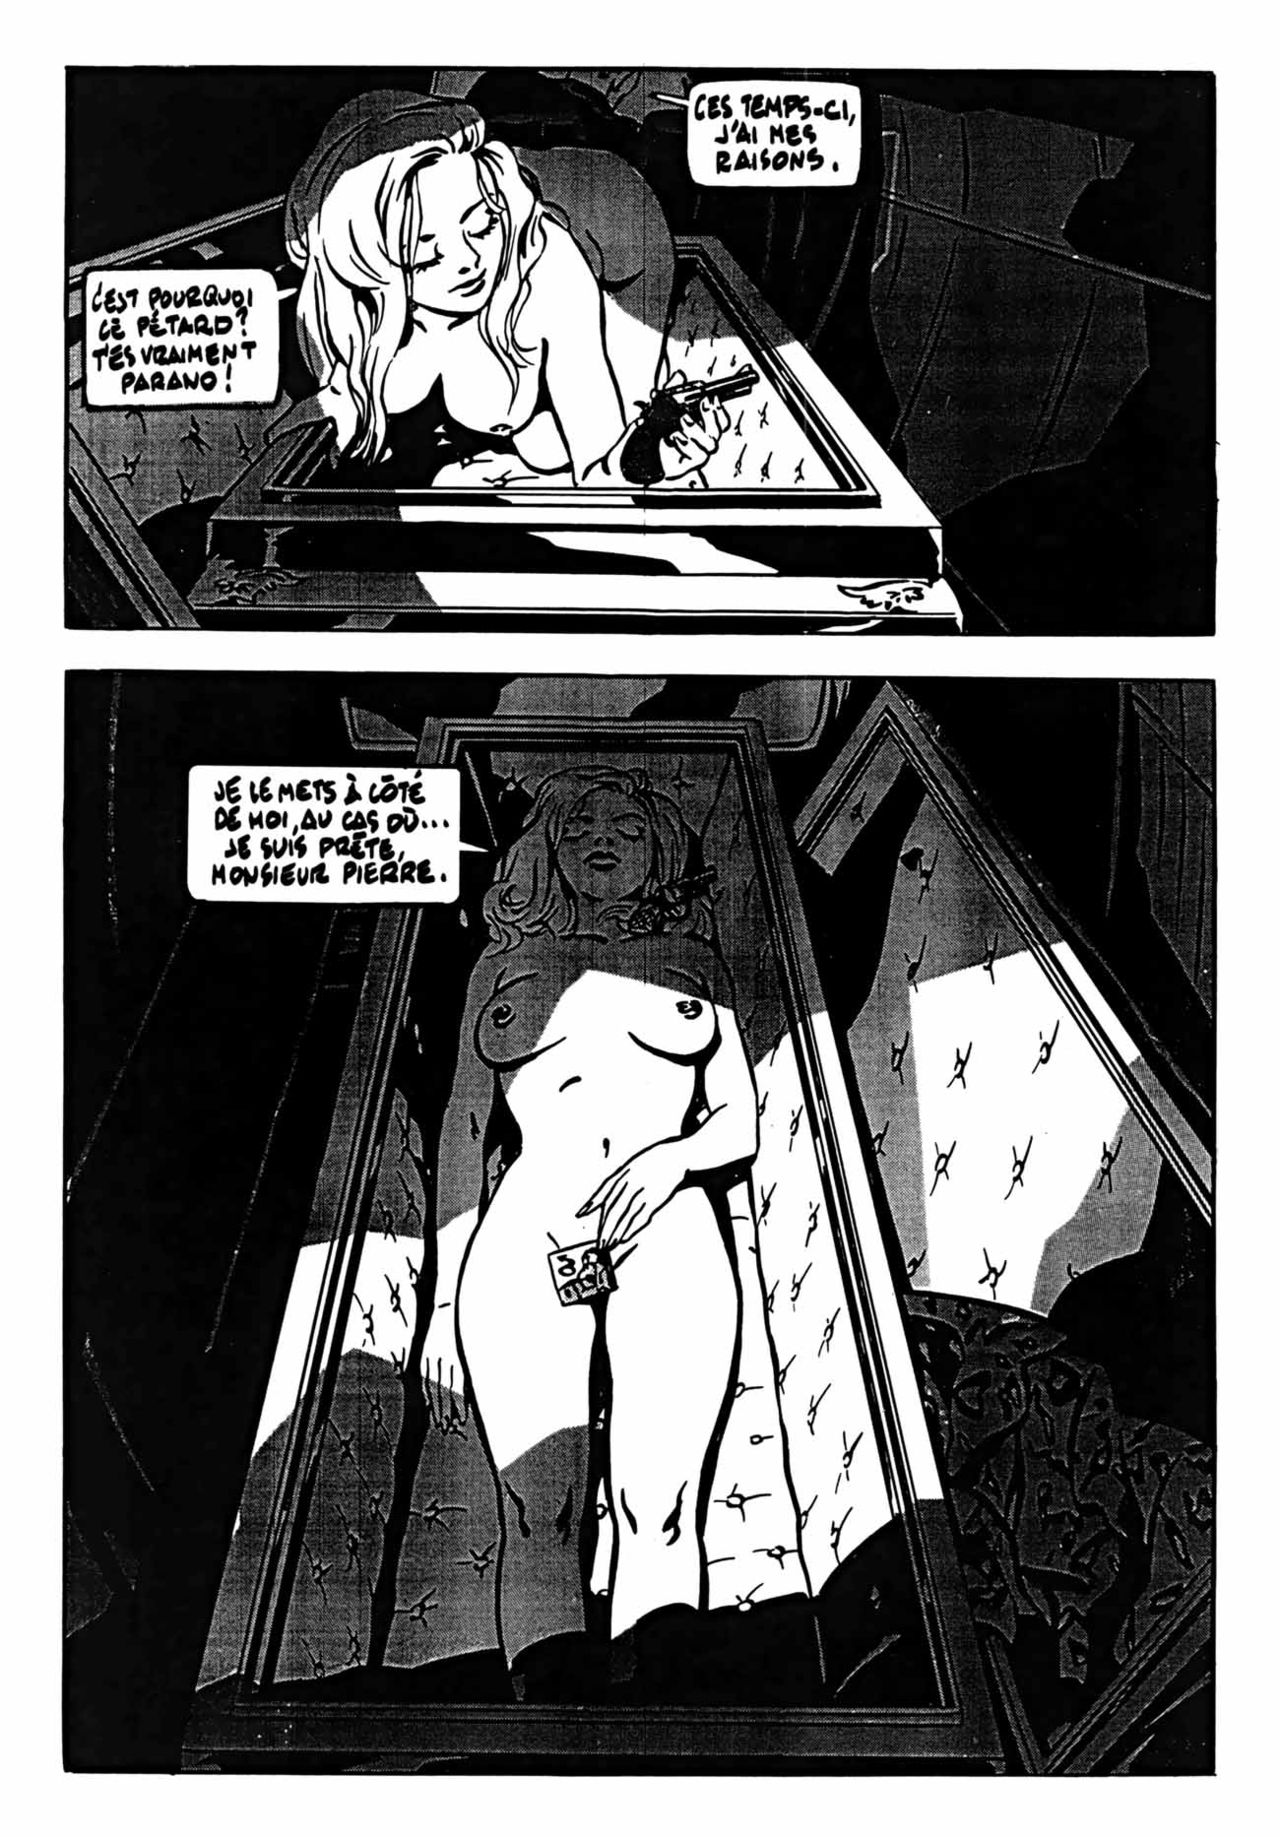 Police By Night - Volume 1 numero d'image 82